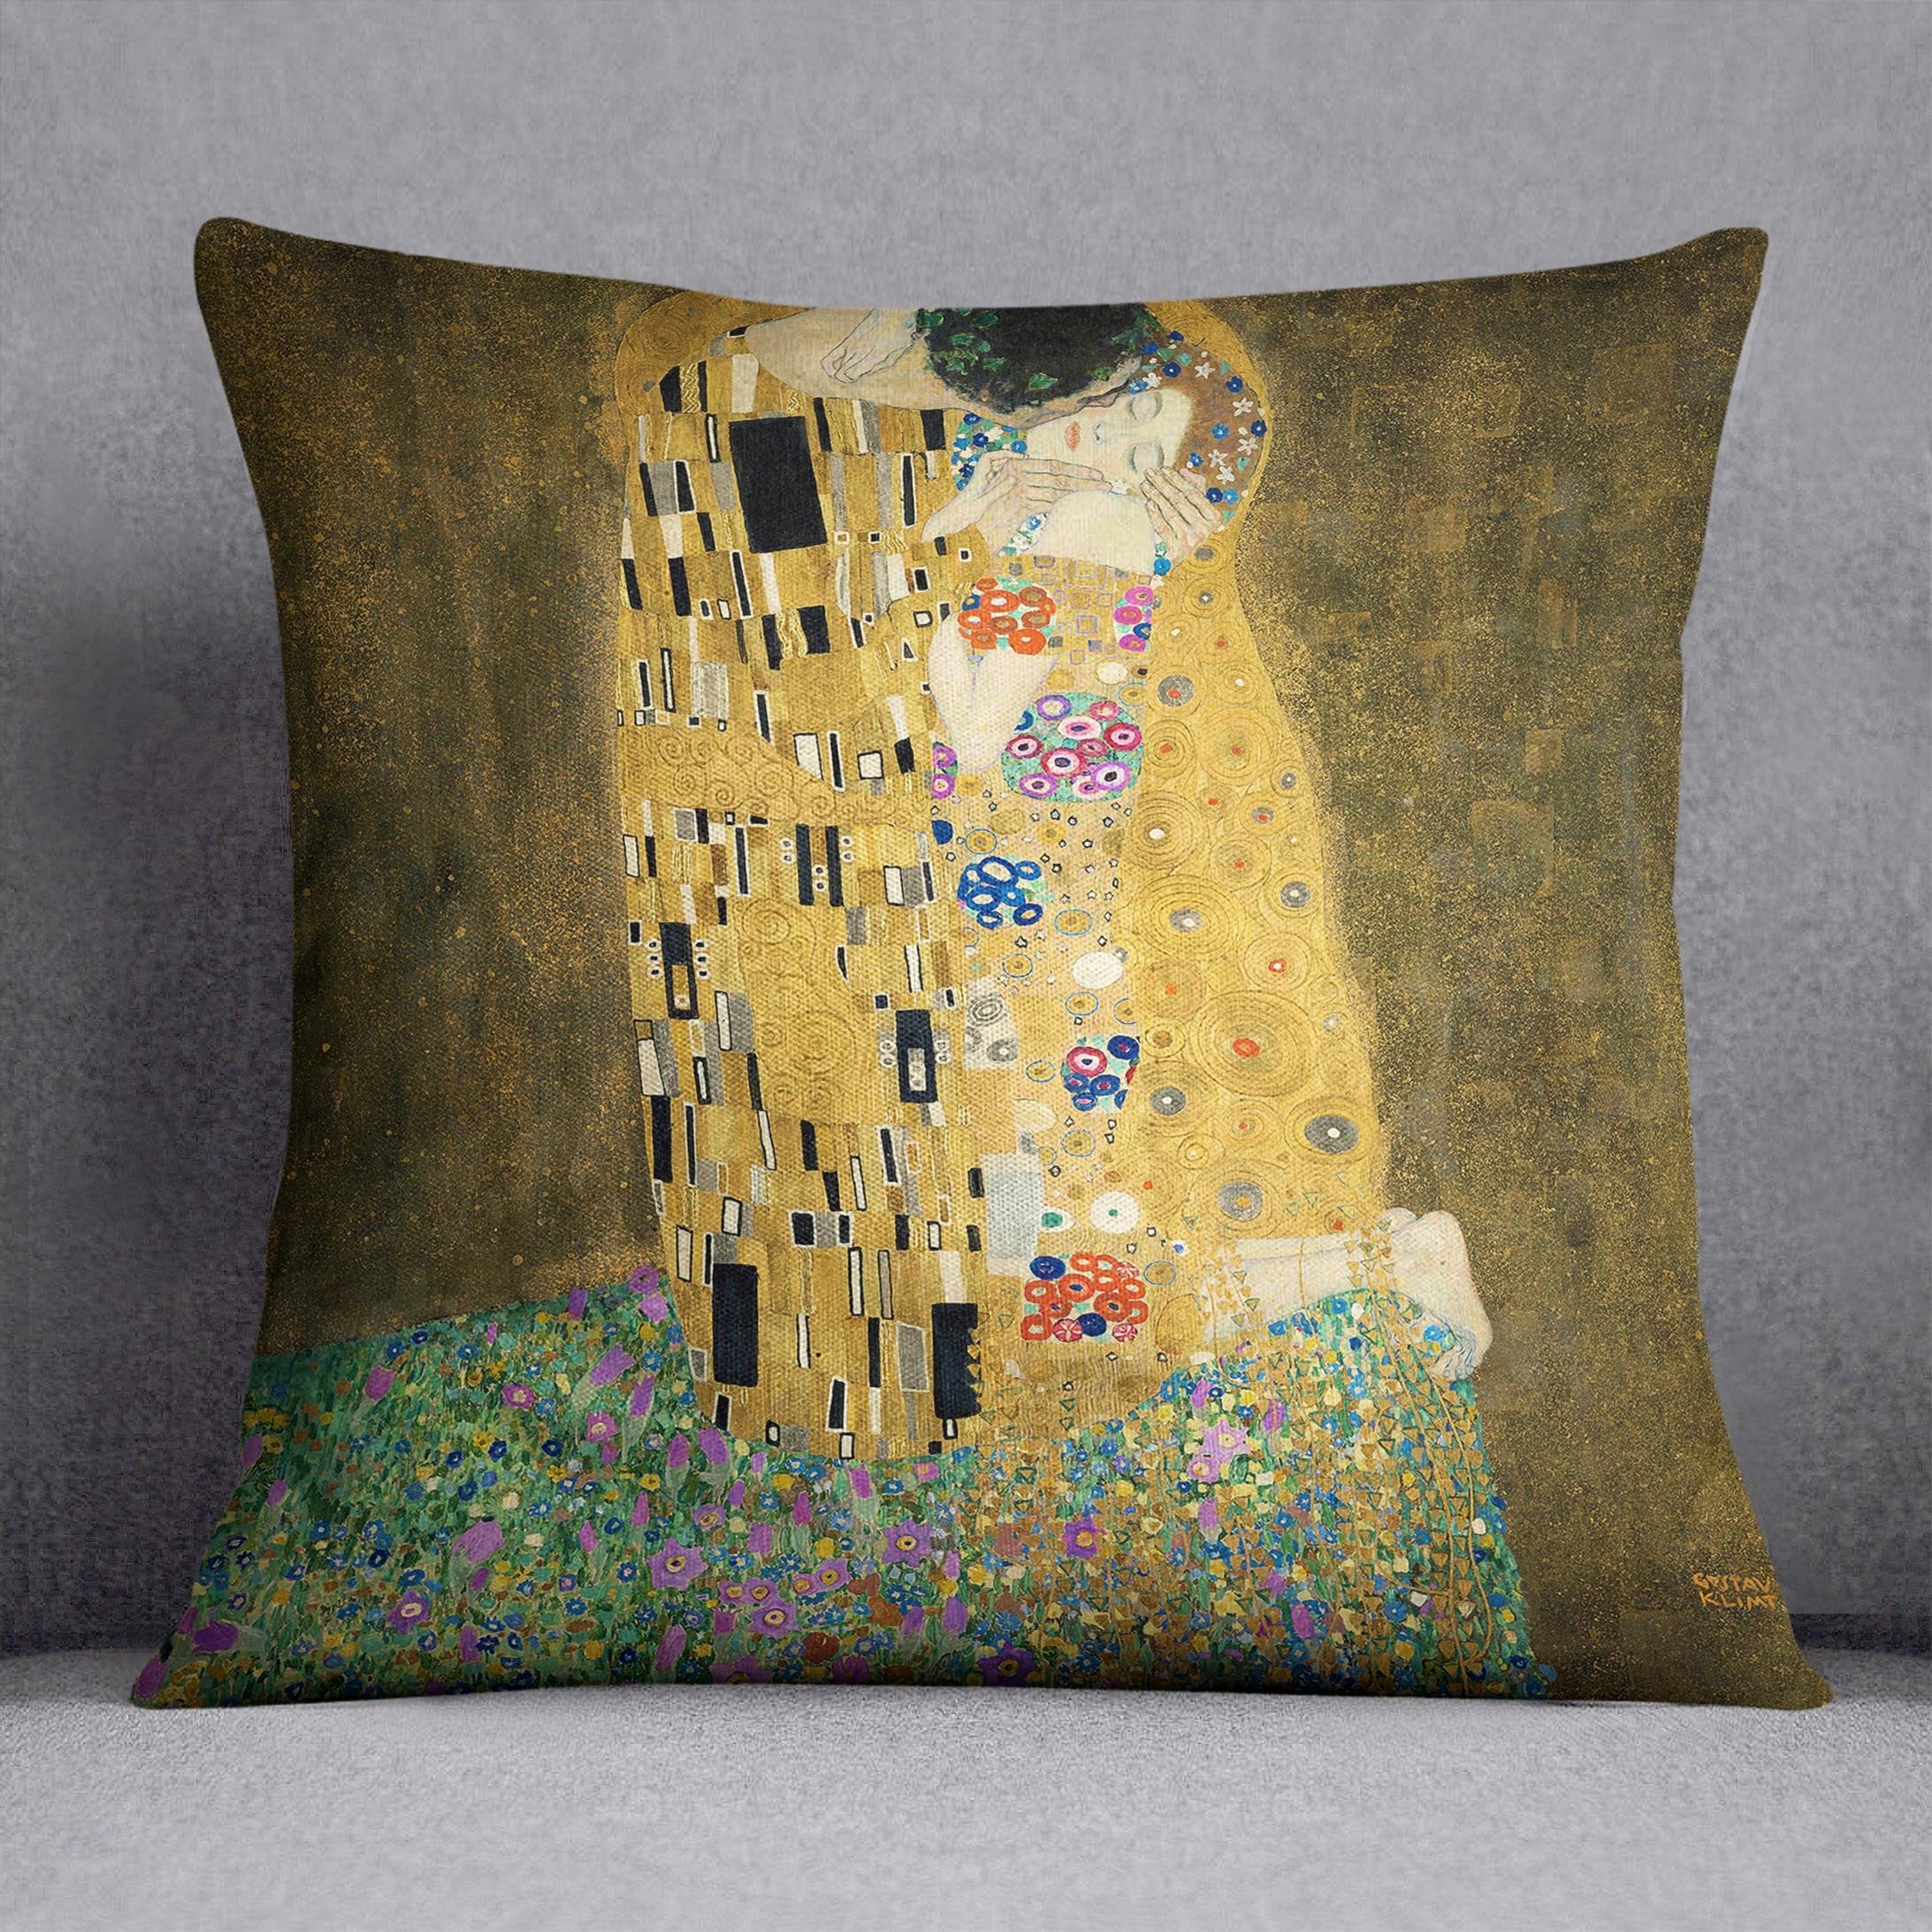 The Kiss by Klimt 2 Throw Pillow